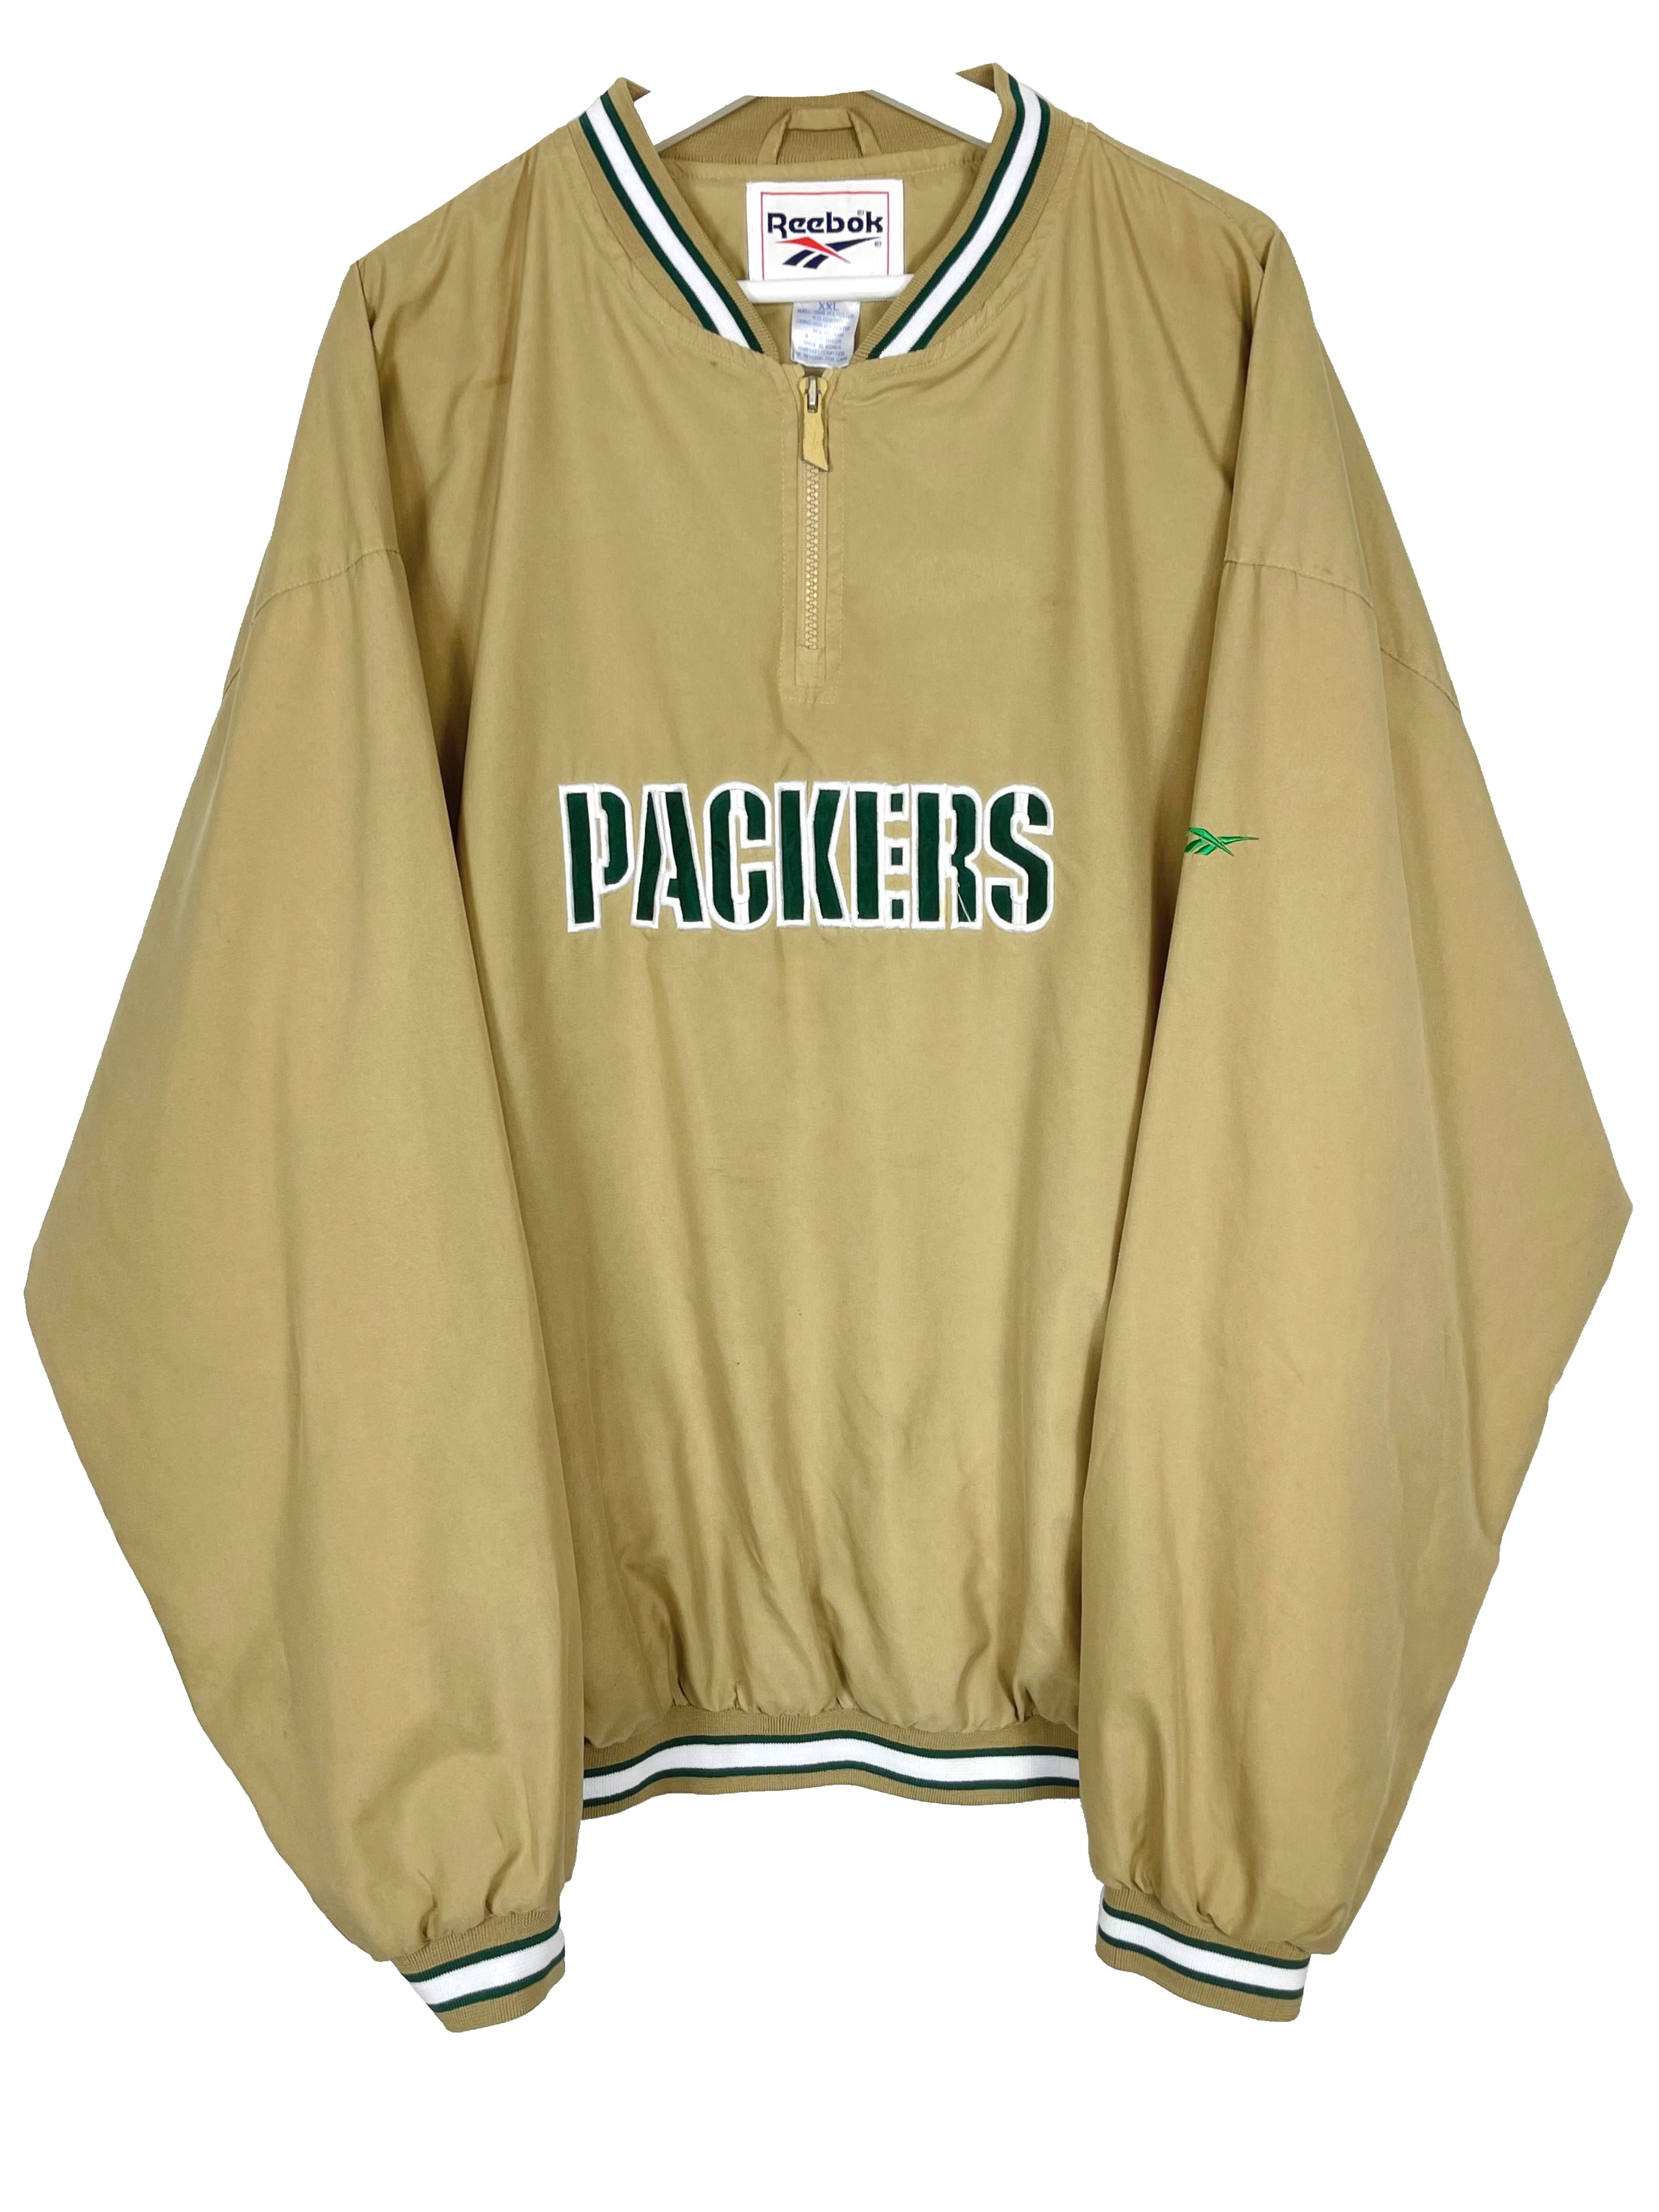  Coupe-vent Reebok Coupe-vent à enfiler - Green Bay Packers - XXL - PLOMOSTORE